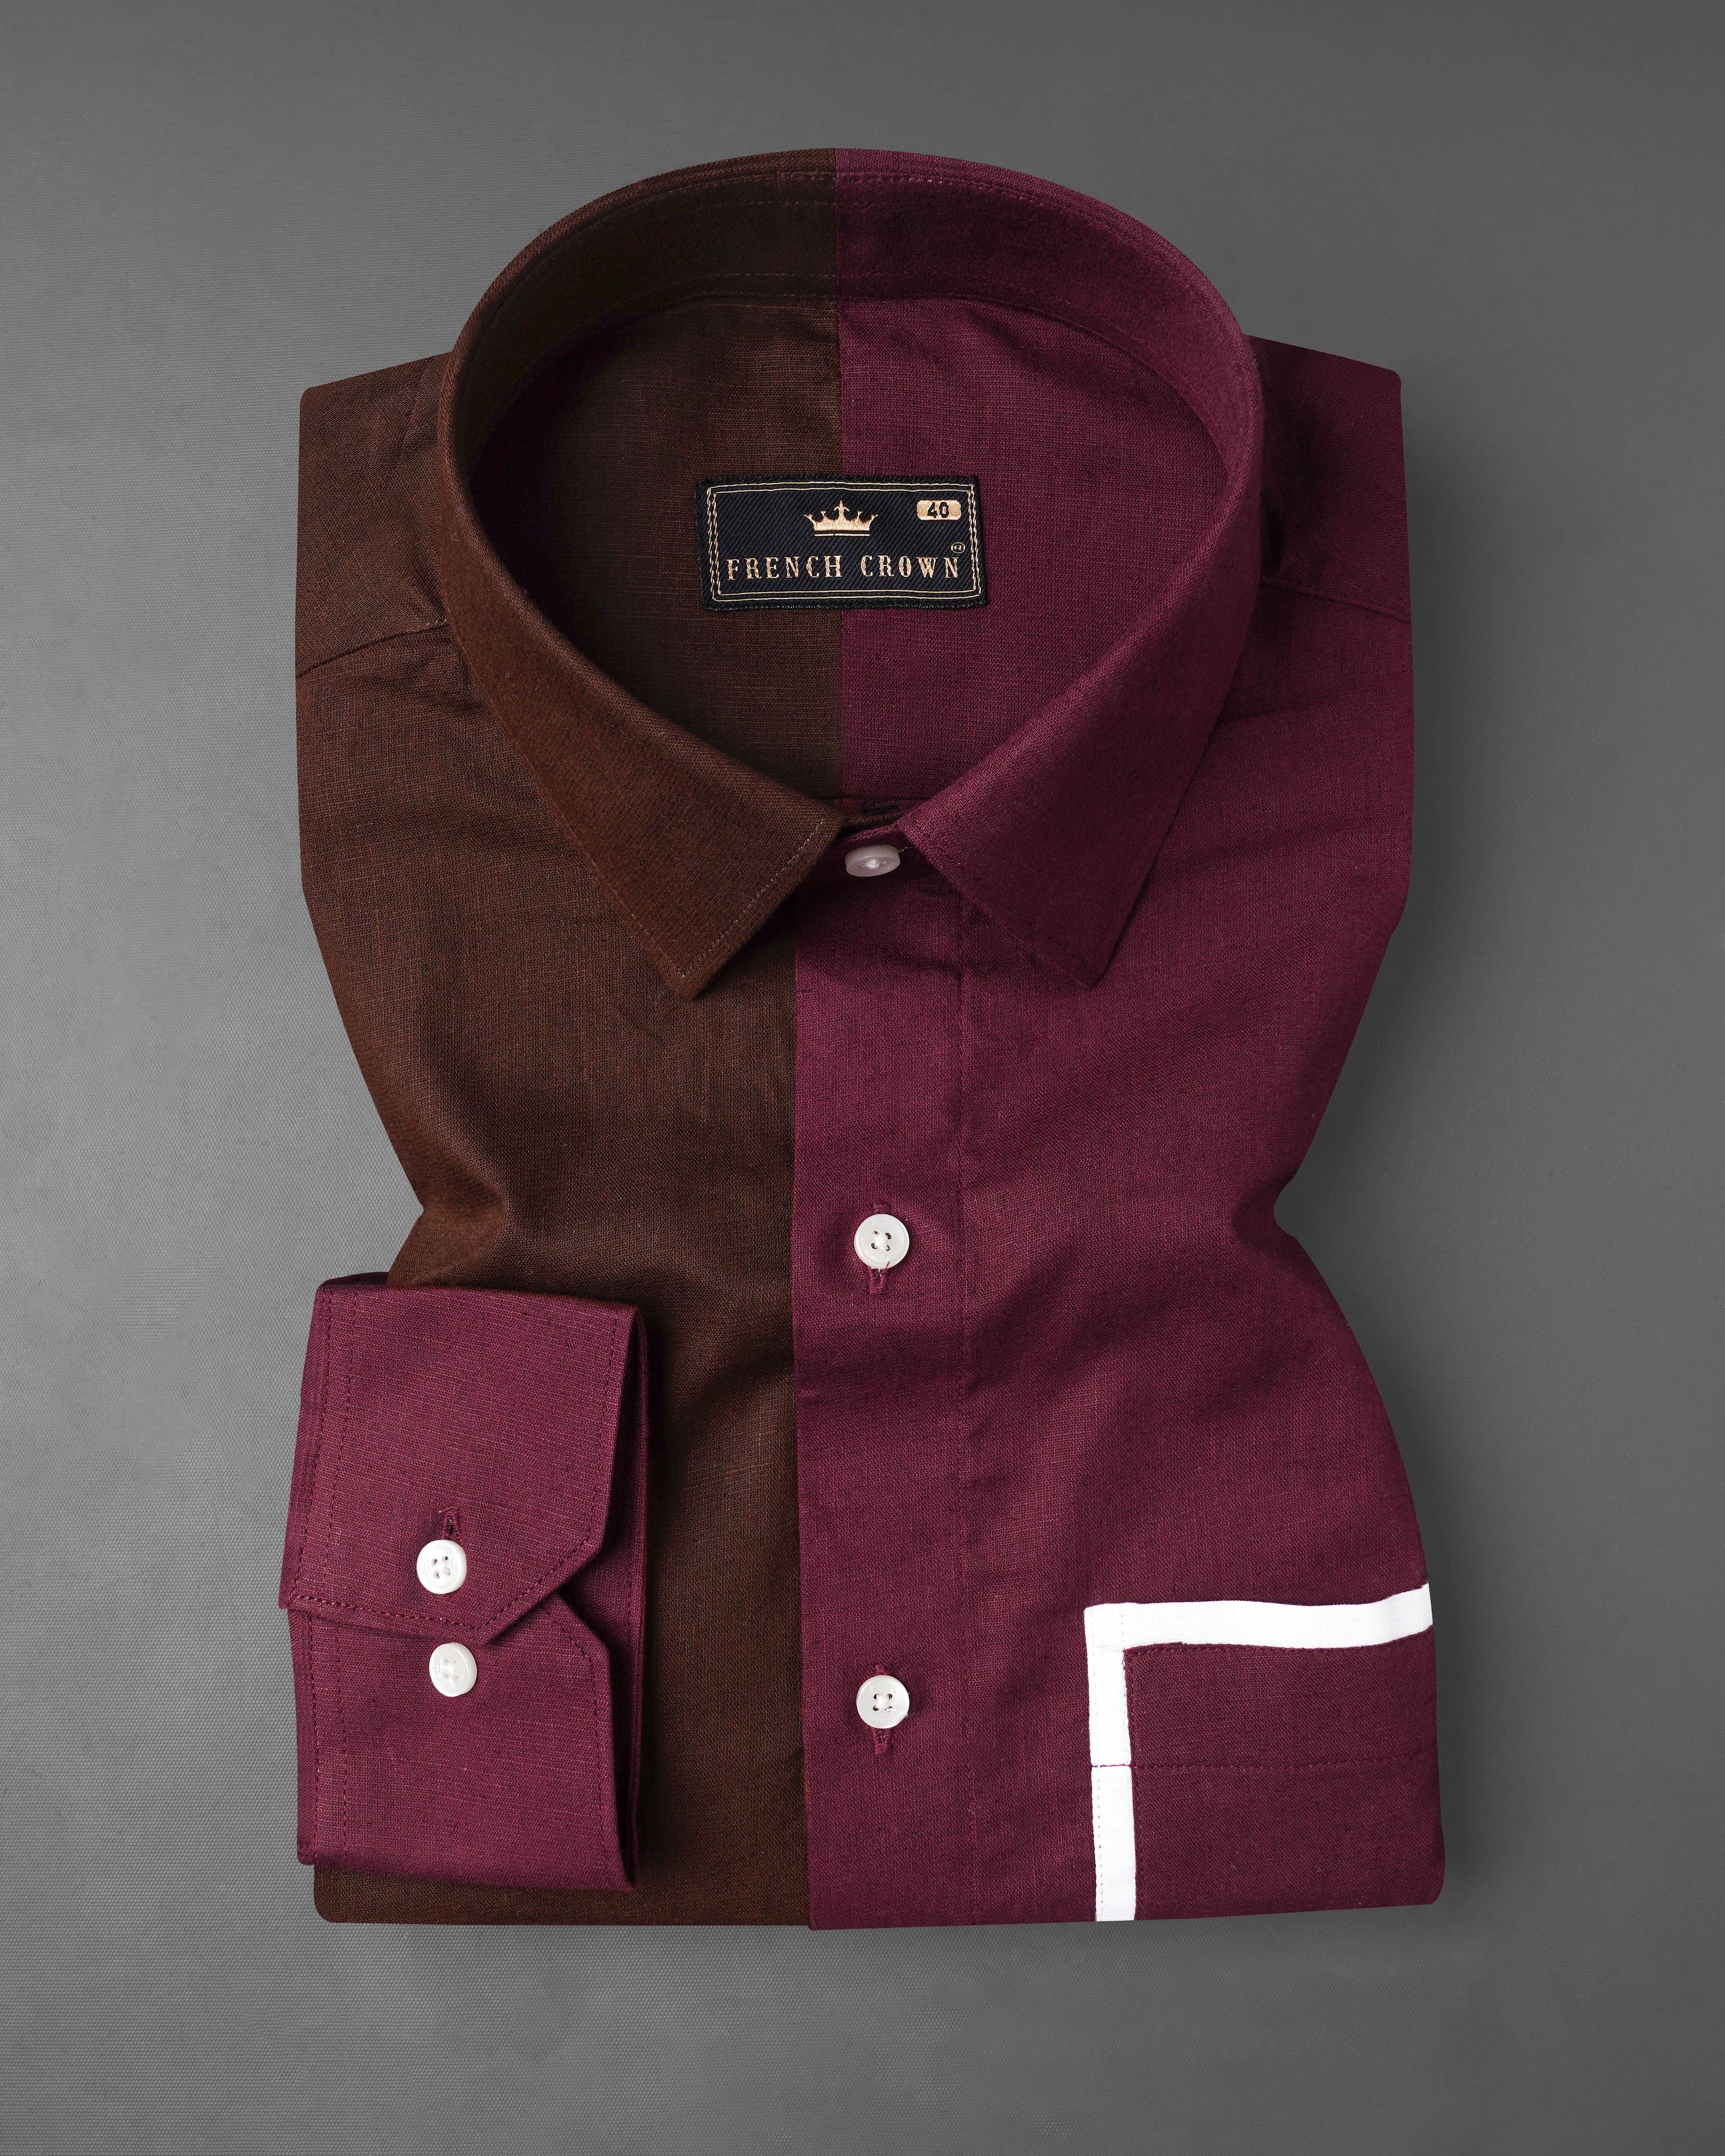 Bordeaux Wine and Brown with White Frame Pocket Luxurious Linen Shirt 8145-P384-38, 8145-P384-H-38, 8145-P384-39, 8145-P384-H-39, 8145-P384-40, 8145-P384-H-40, 8145-P384-42, 8145-P384-H-42, 8145-P384-44, 8145-P384-H-44, 8145-P384-46, 8145-P384-H-46, 8145-P384-48, 8145-P384-H-48, 8145-P384-50, 8145-P384-H-50, 8145-P384-52, 8145-P384-H-52